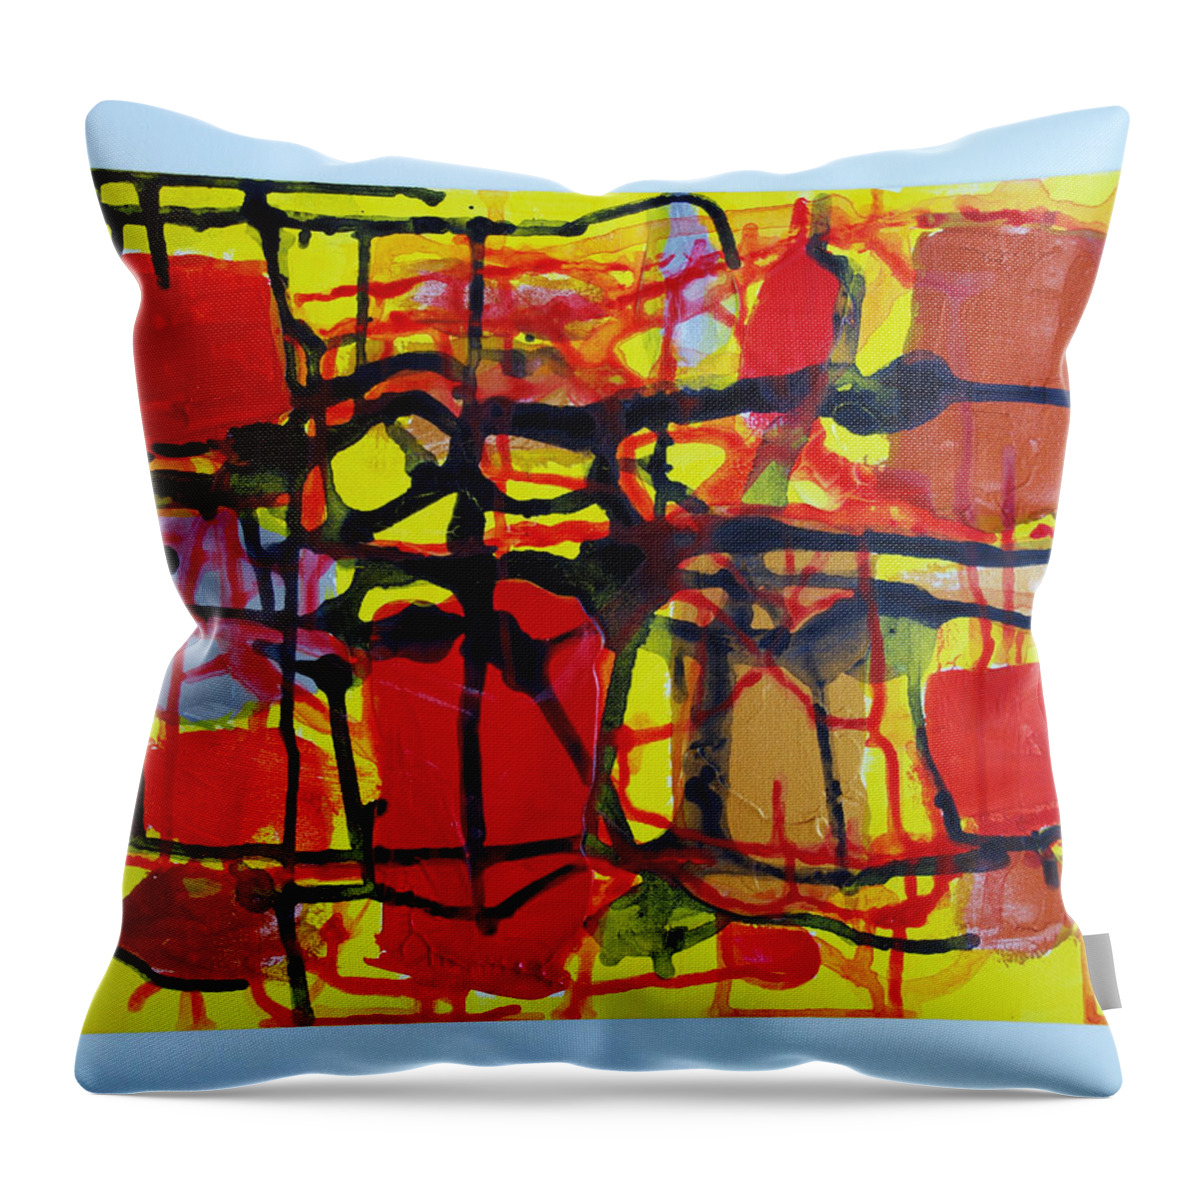  Throw Pillow featuring the painting Caos 05 by Giuseppe Monti